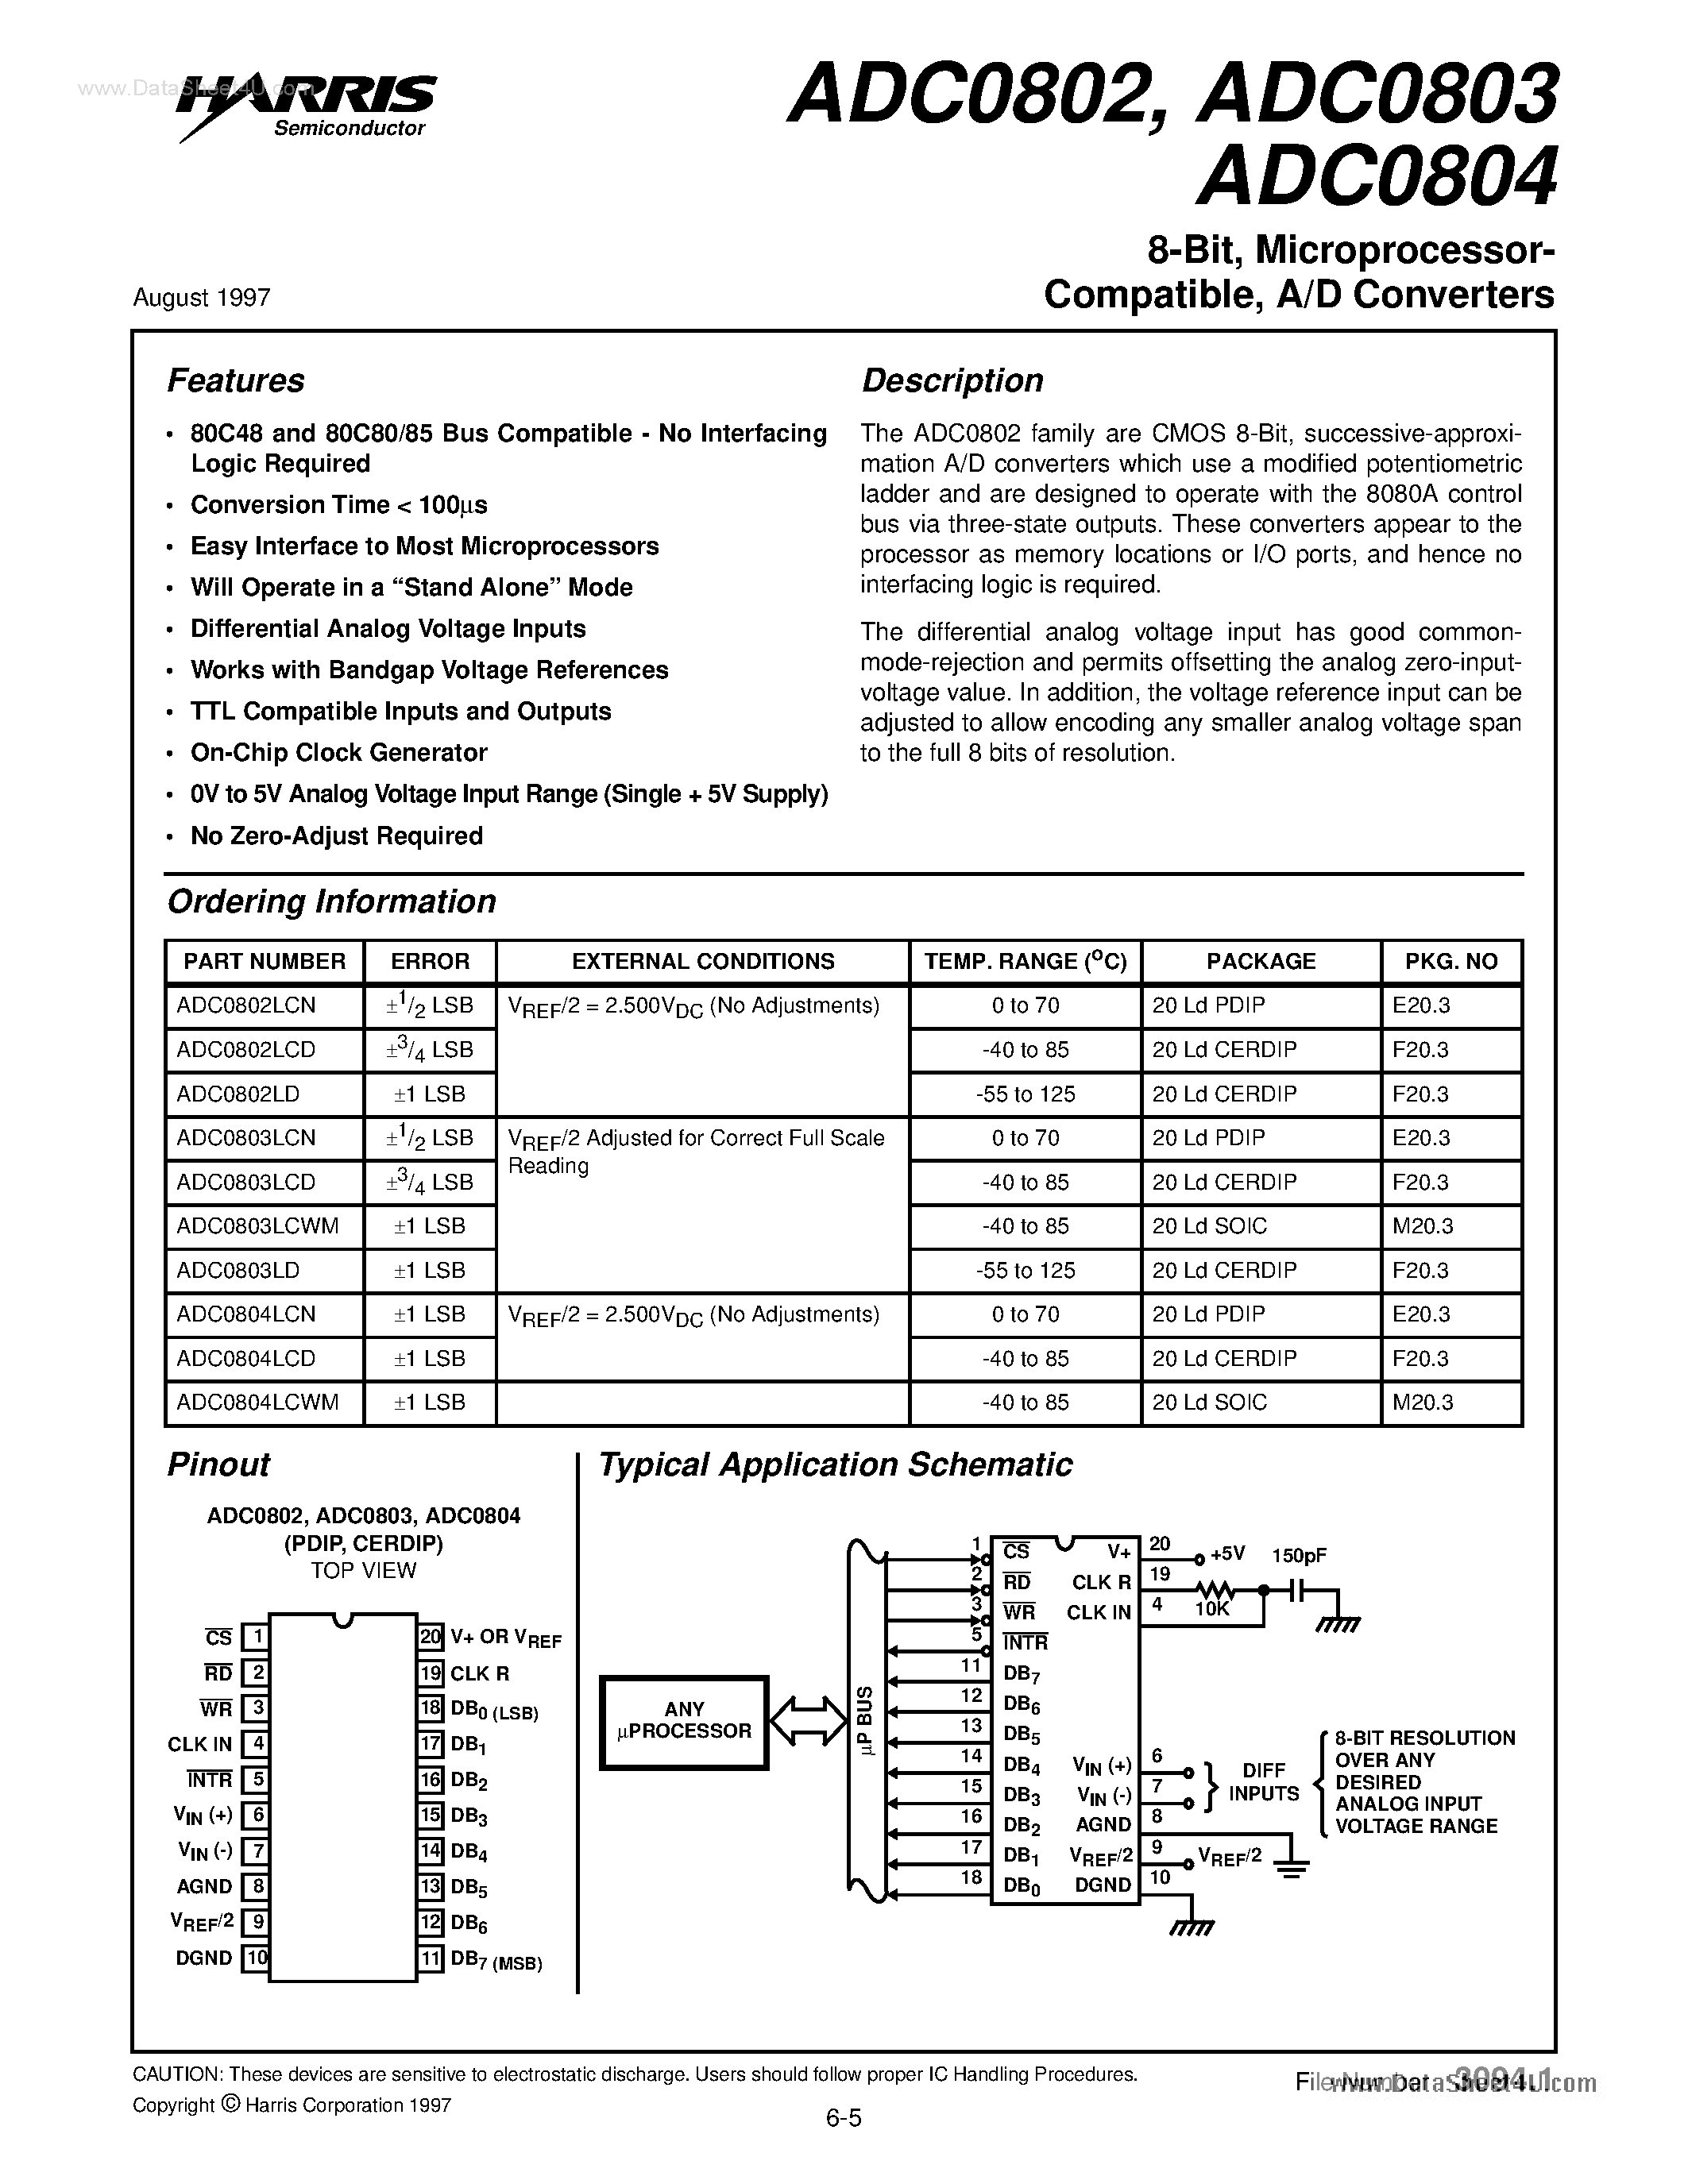 Datasheet ADC-0802 - (ADC0802 - ADC0804) 8-Bit/ Microprocessor- Compatible/ A/D Converters page 1